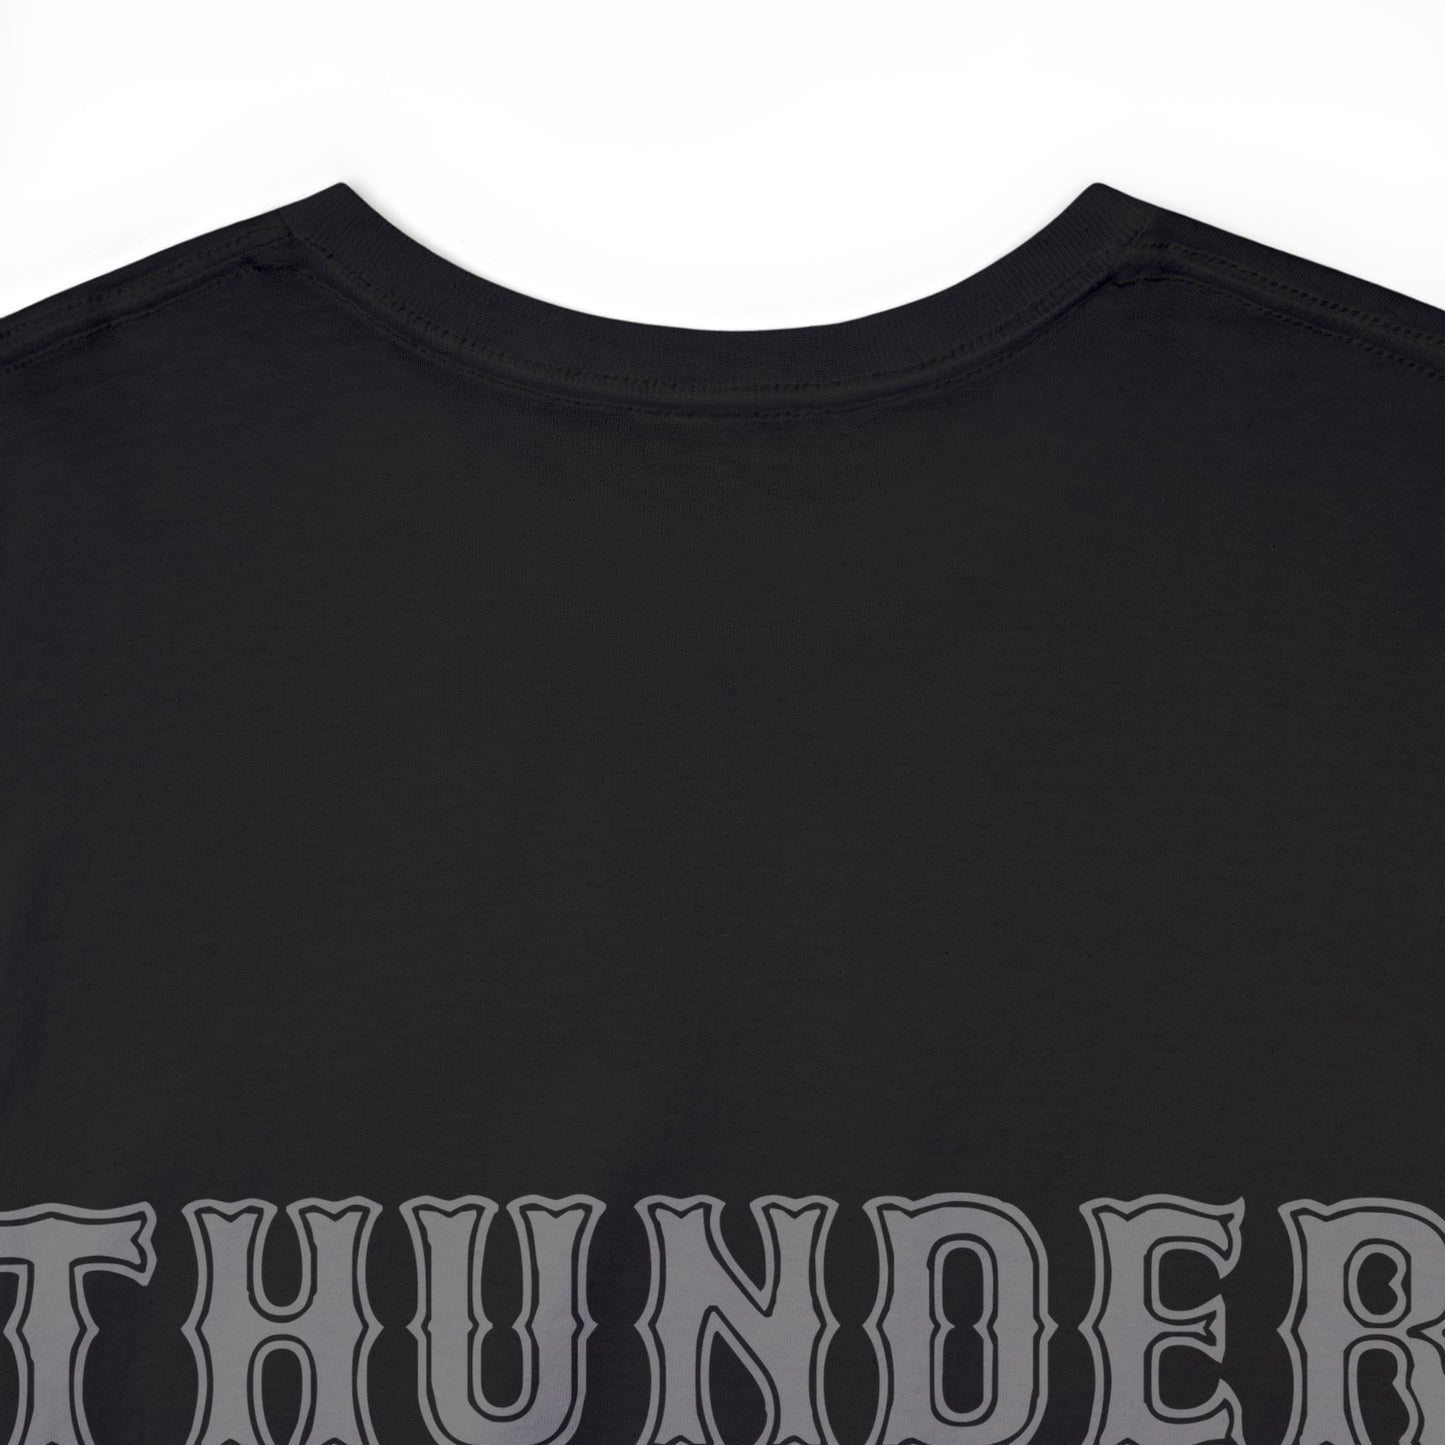 Thunder Buddies for Life Adult Heavy Cotton Tee